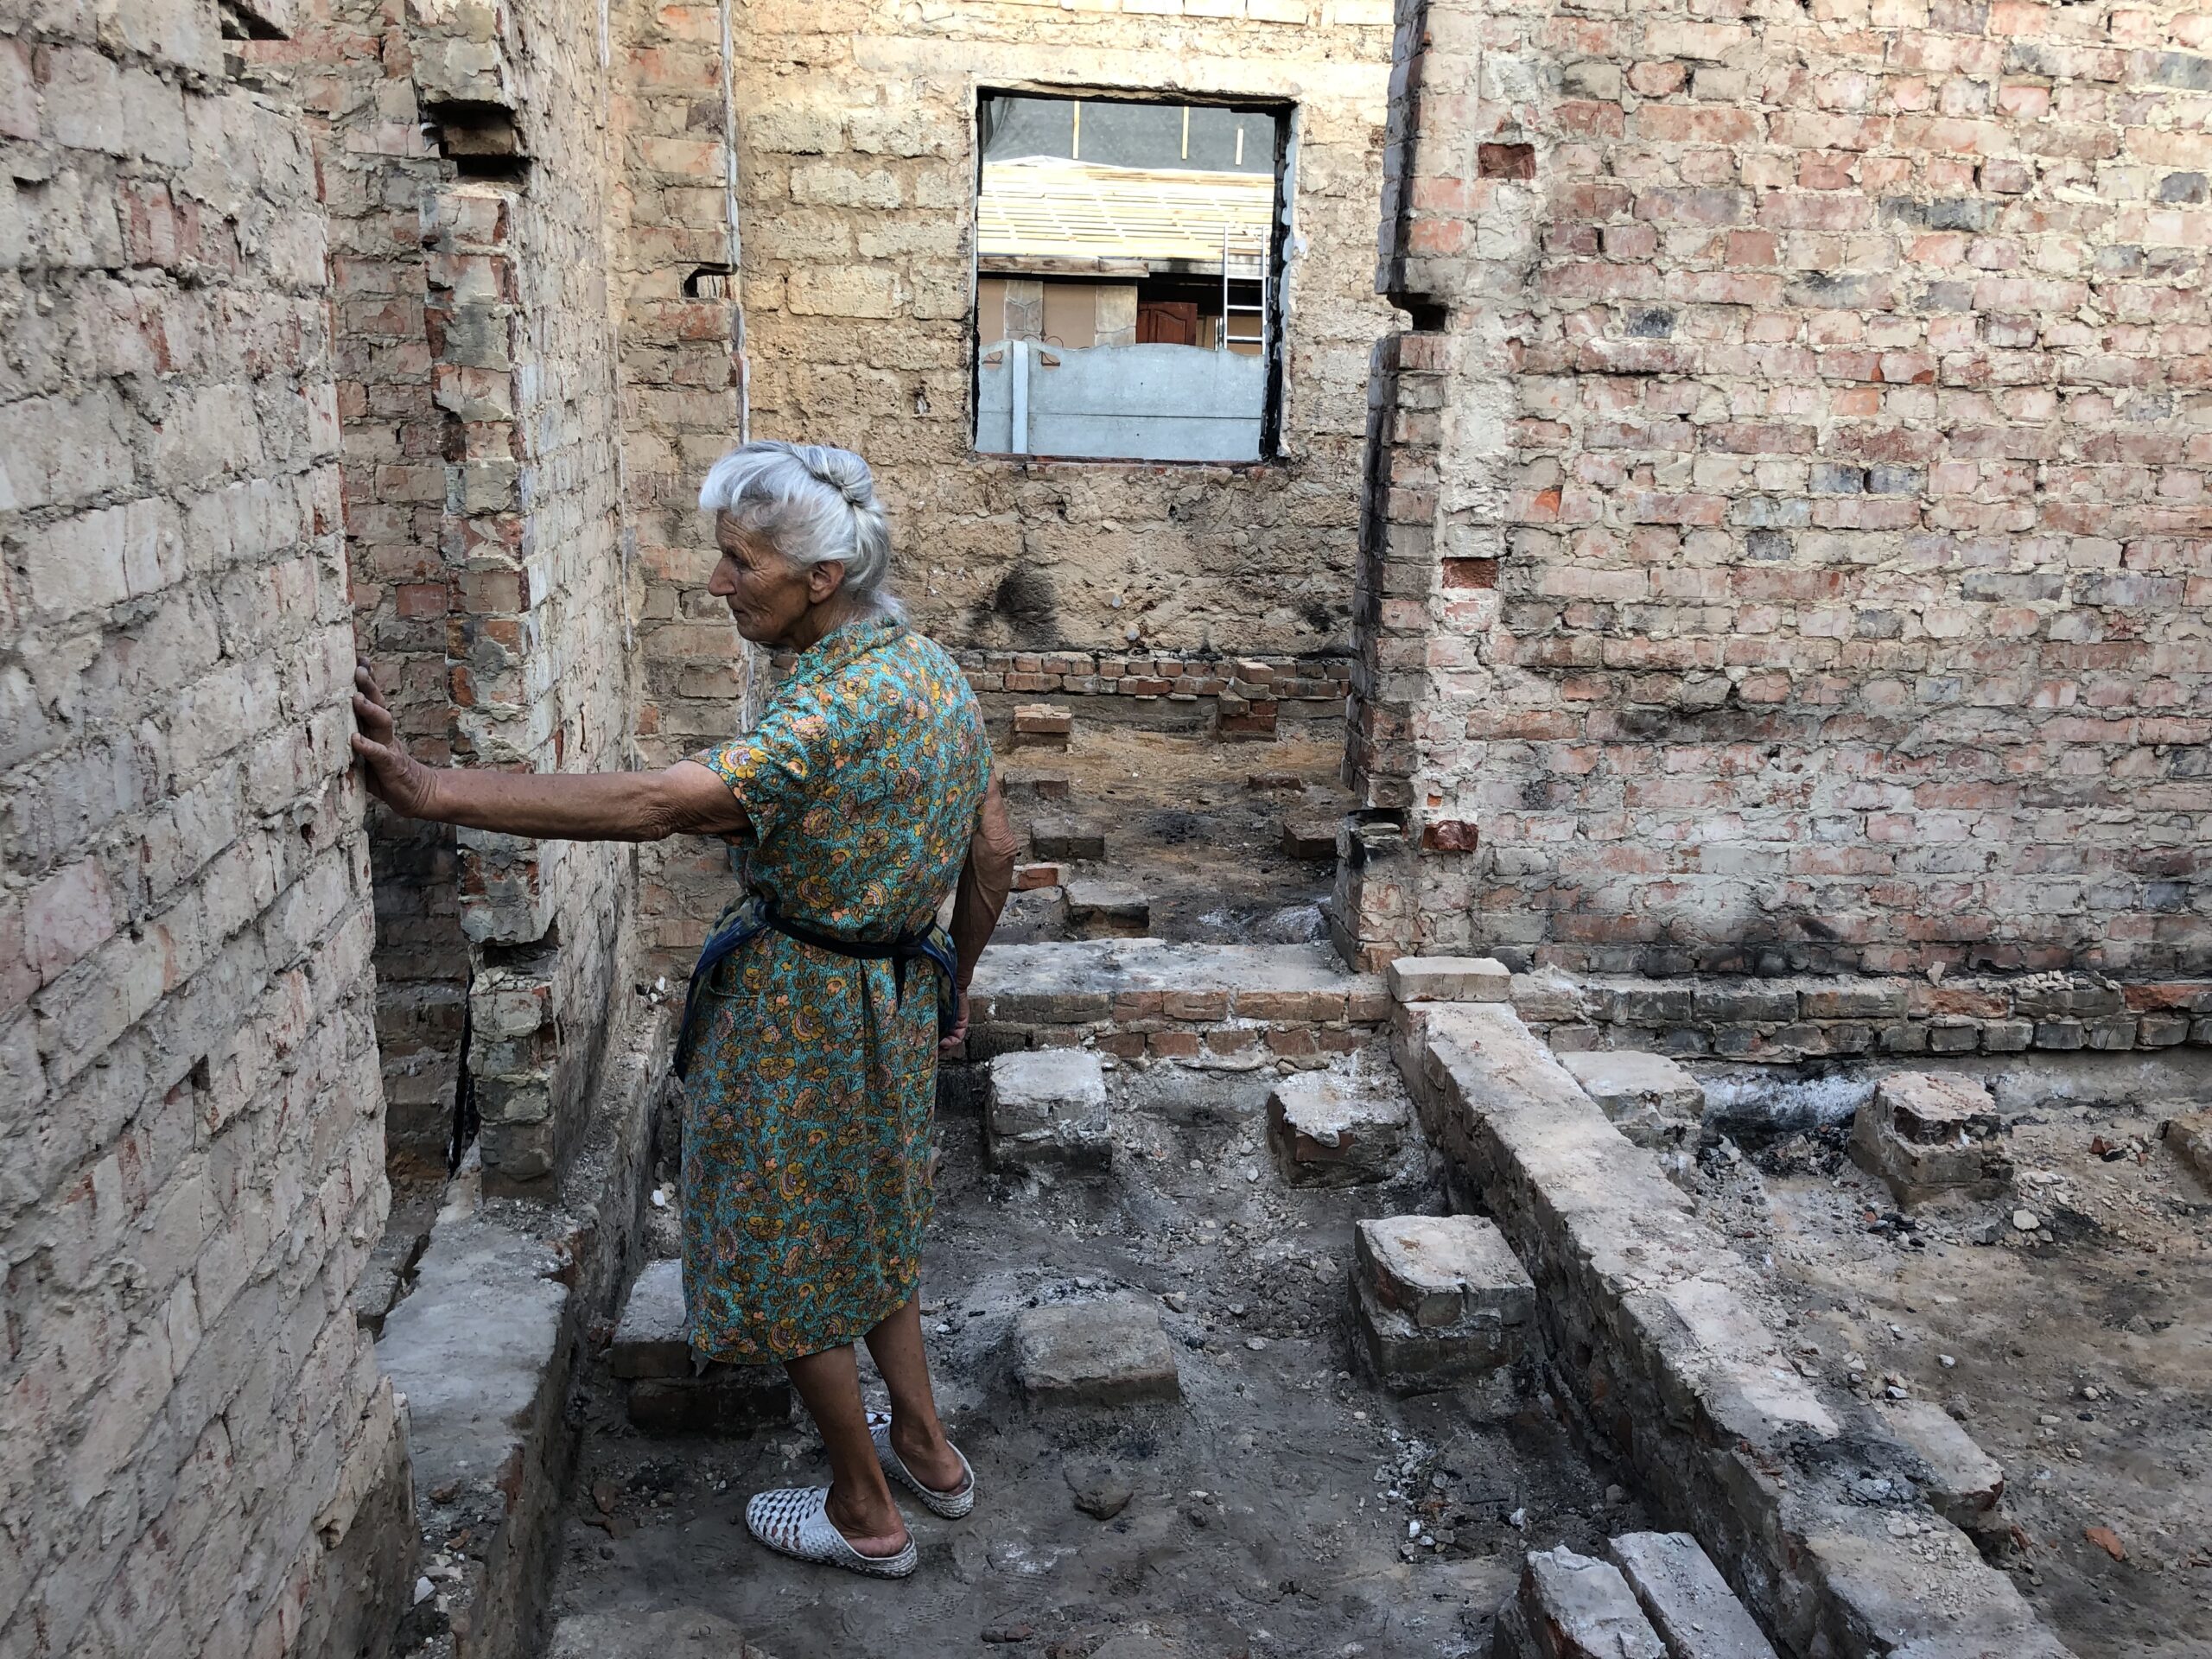 Ukraine: Older people face heightened risks, unable to access housing in displacement following Russian invasion – new report